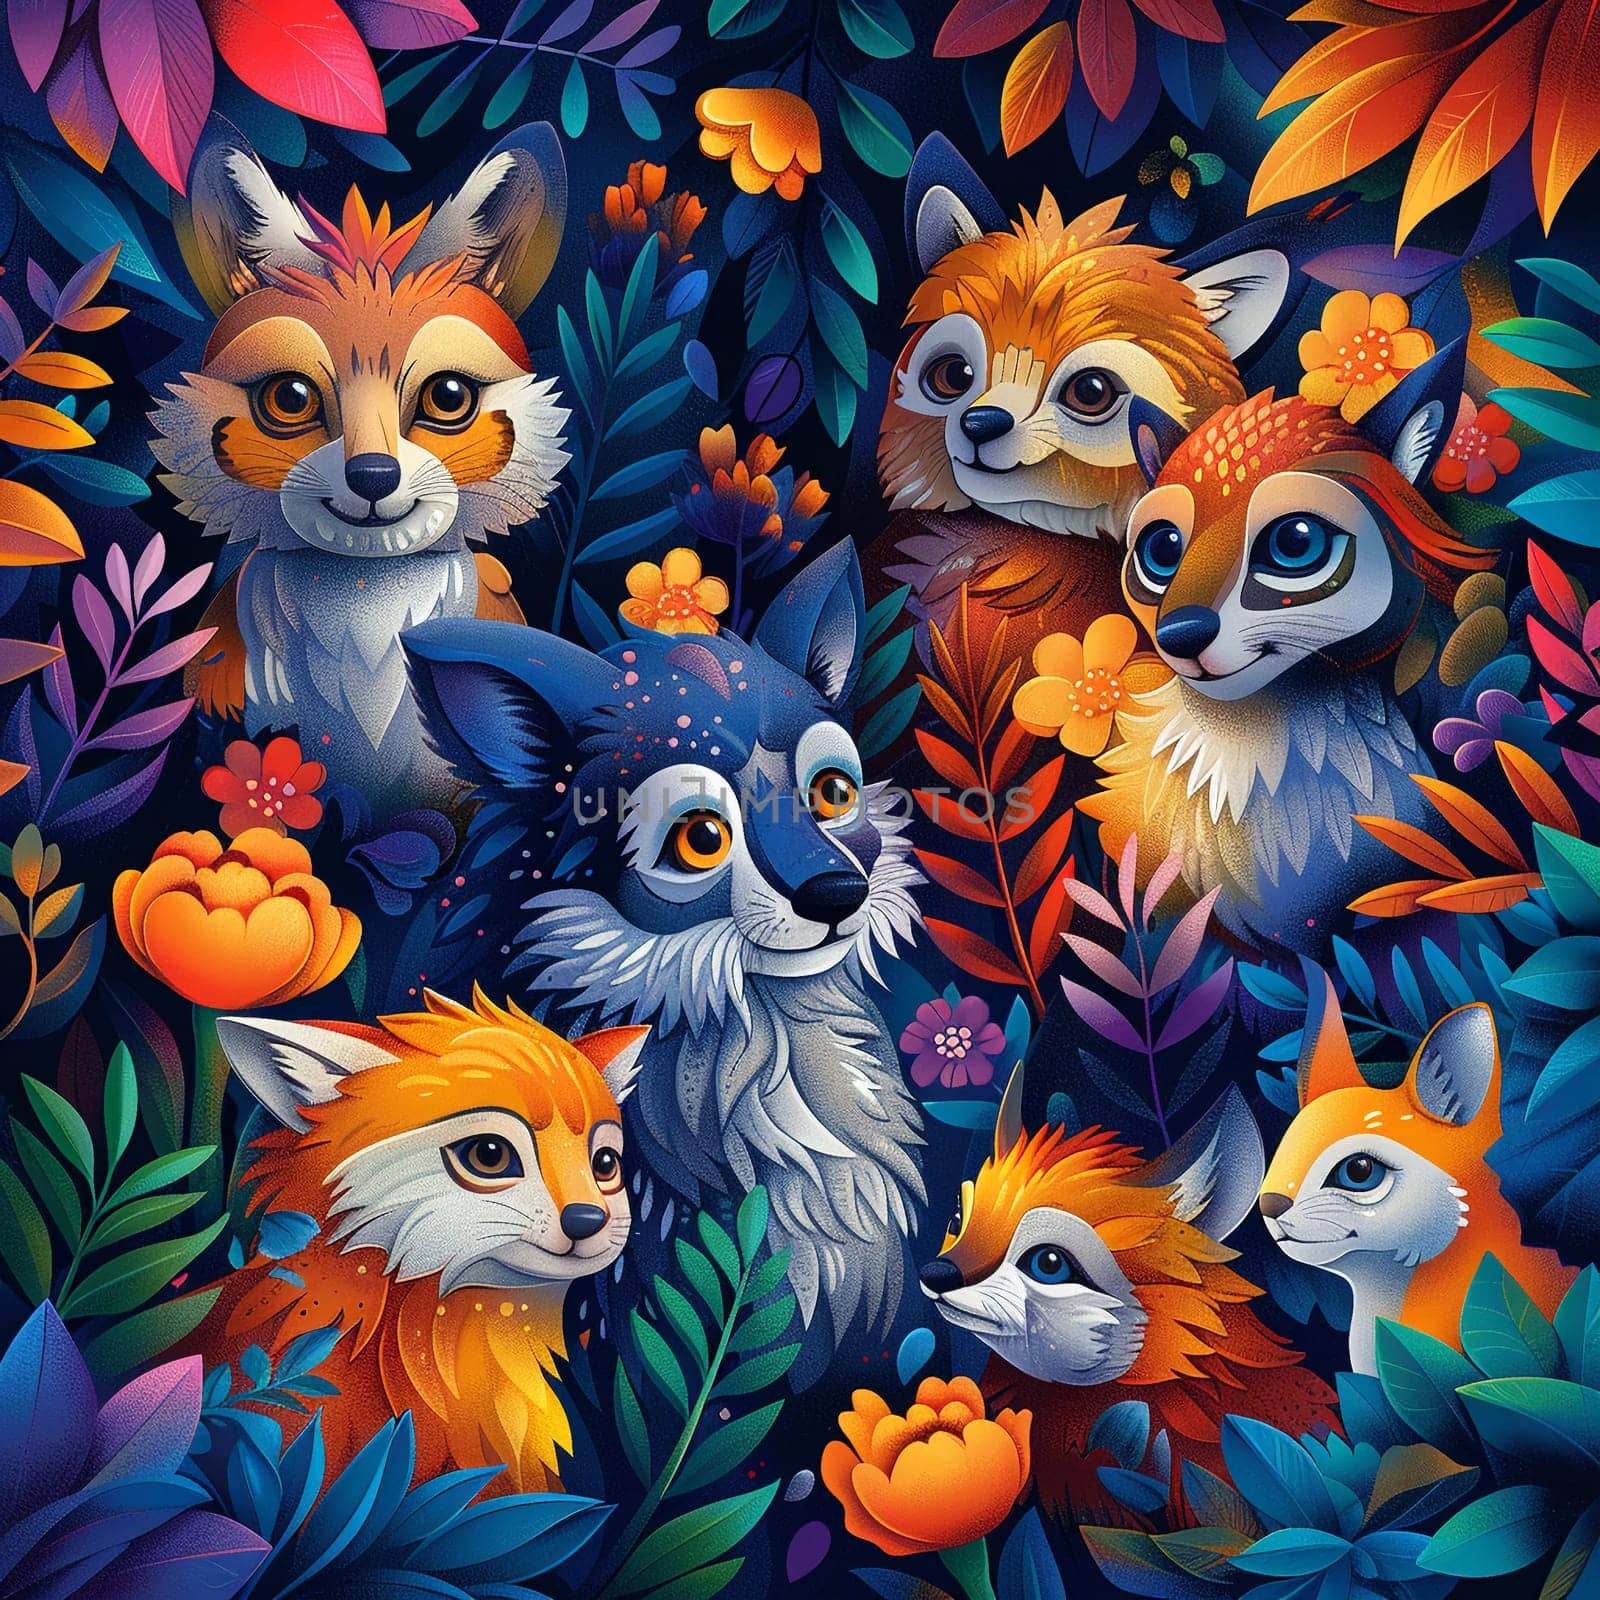 Abstract illustration of animals coming together in colorful forest, representing World Wildlife Day.